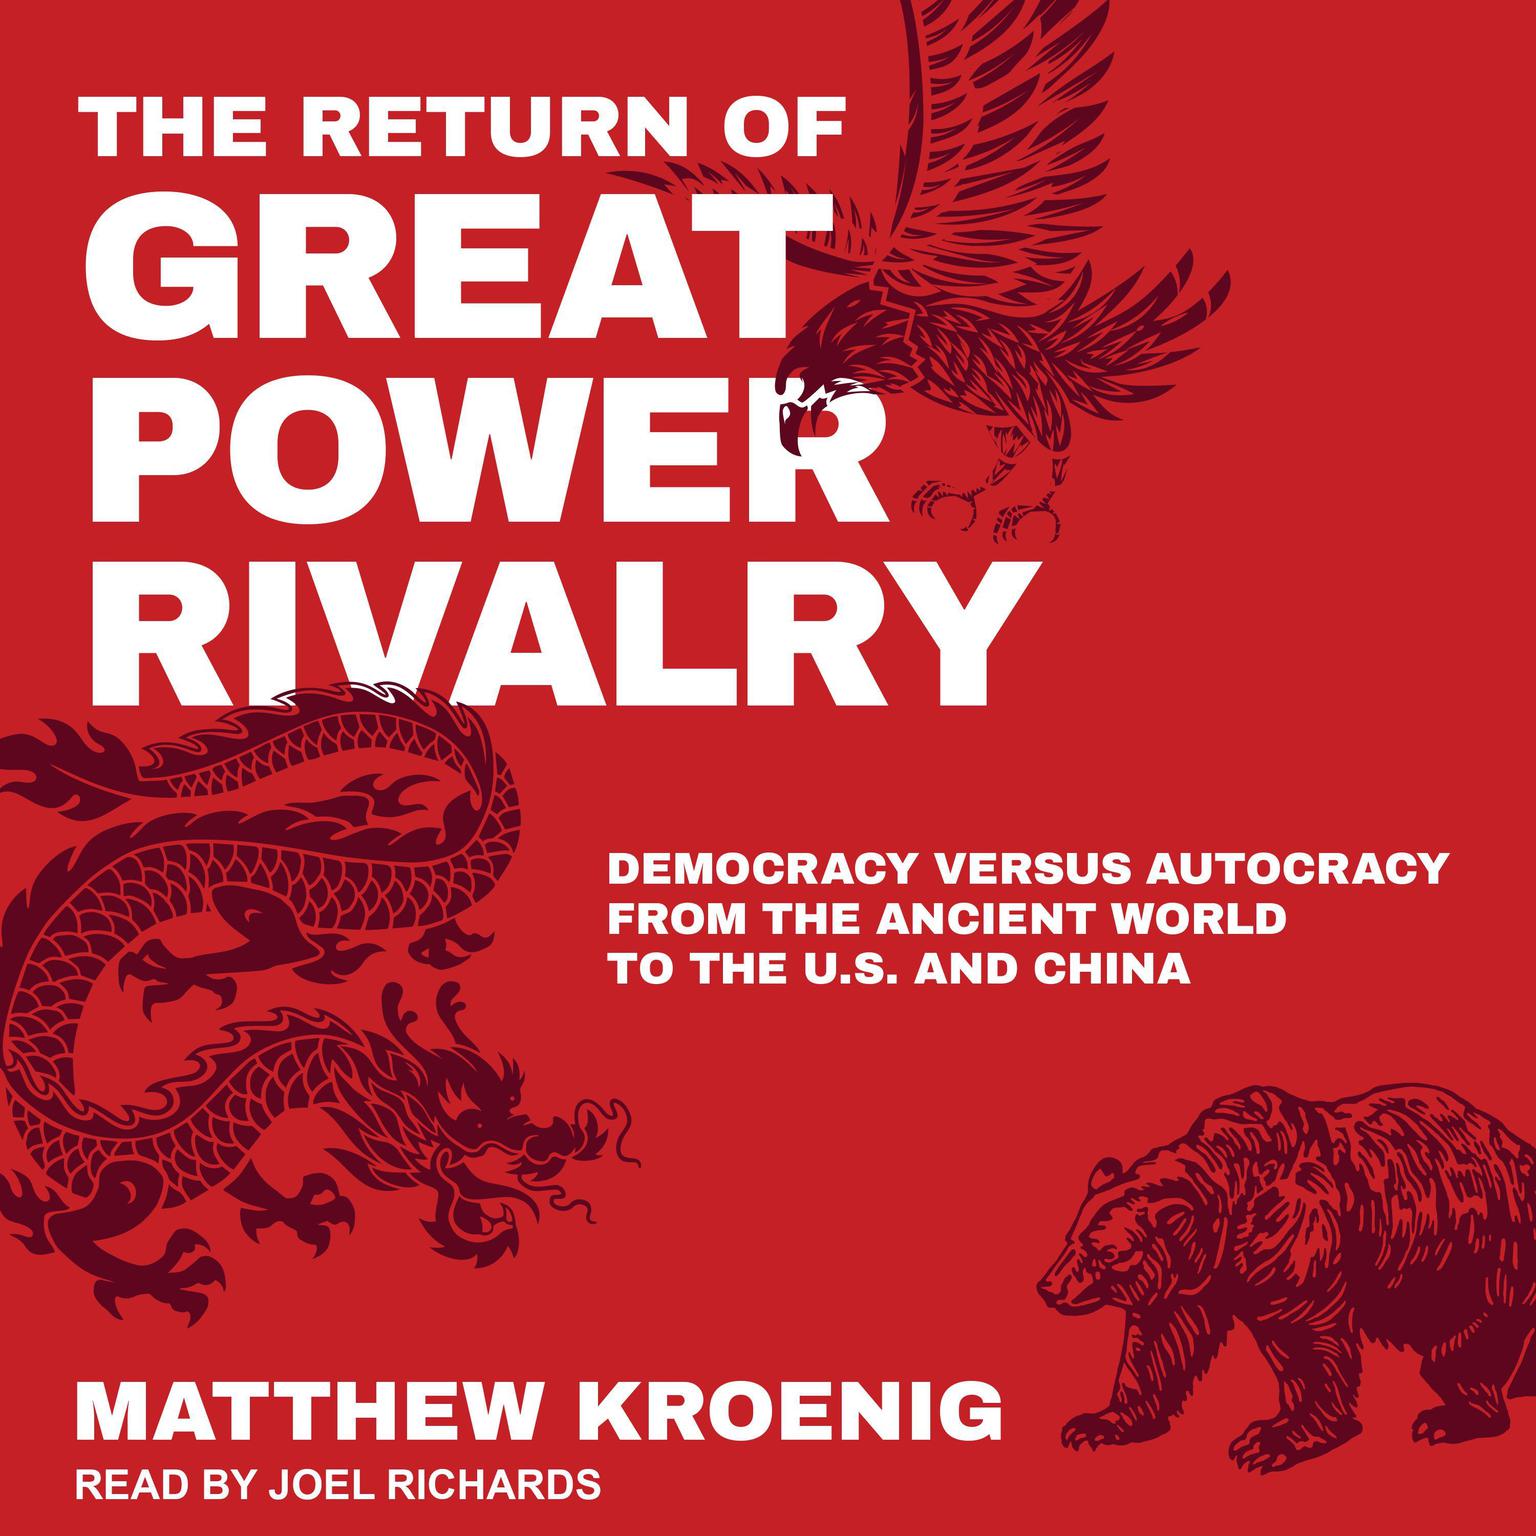 The Return of Great Power Rivalry: Democracy versus Autocracy from the Ancient World to the U.S. and China Audiobook, by Matthew Kroenig